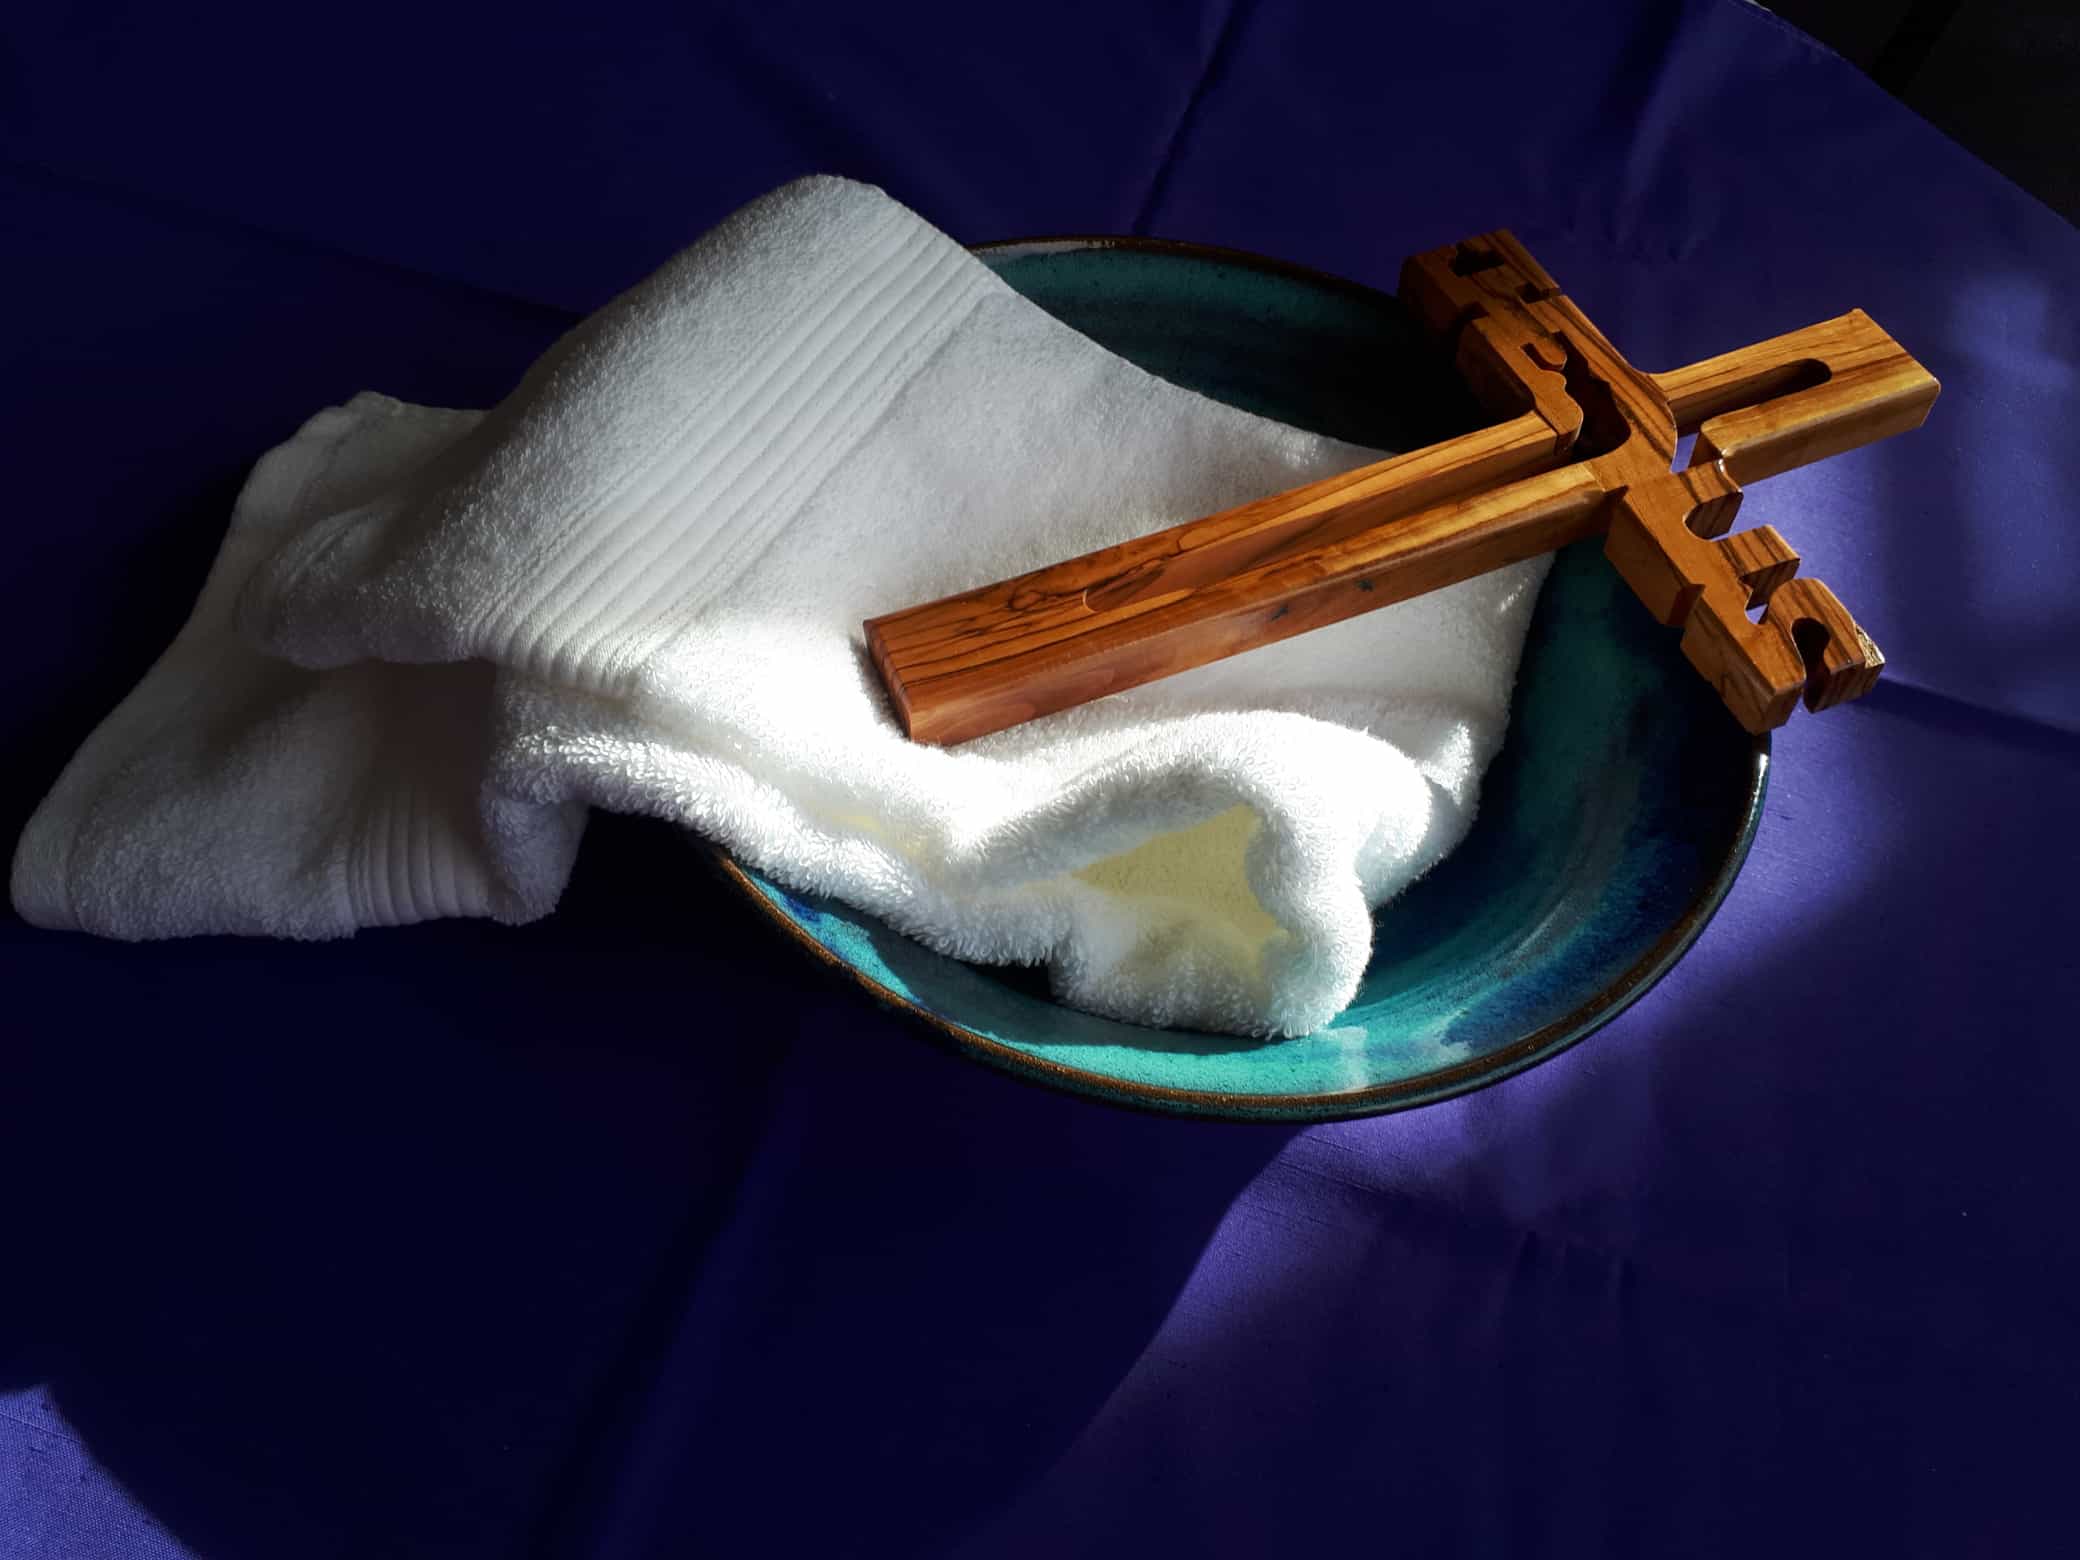 Towel and cross in bowl